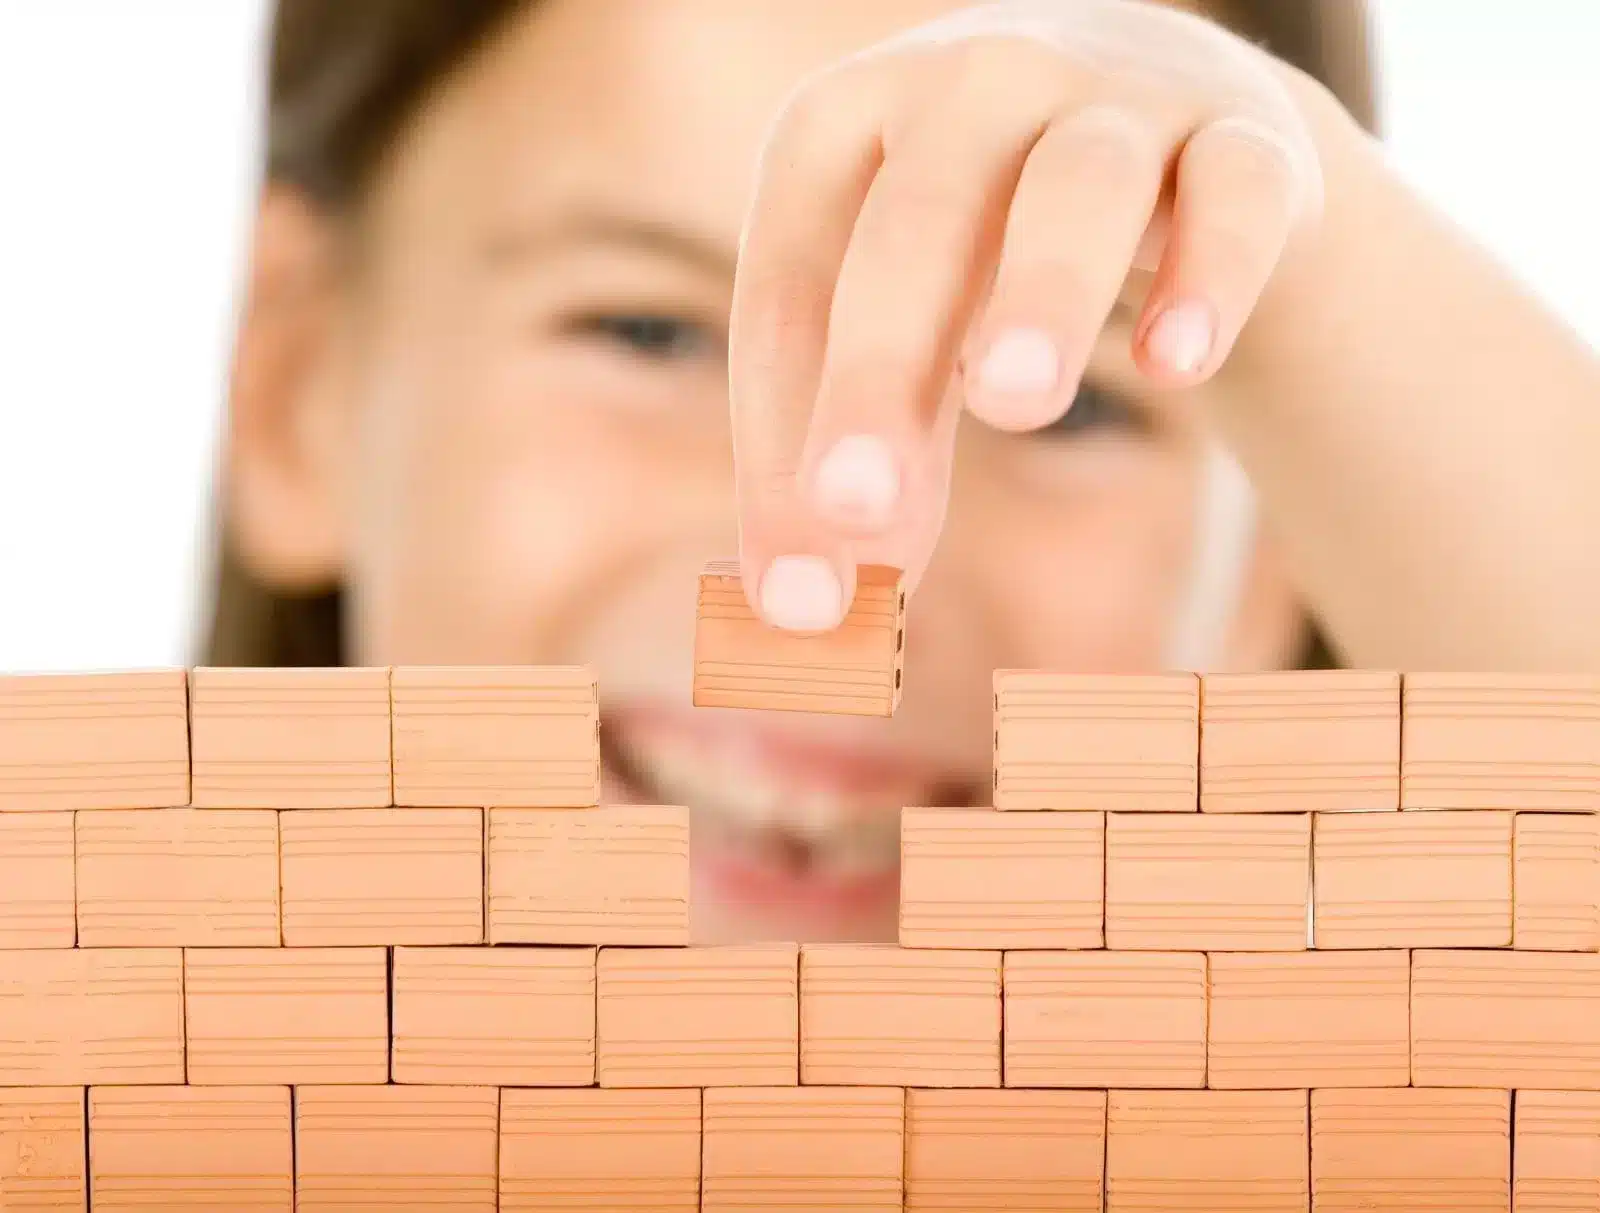 Child Building a Wall With Blocks